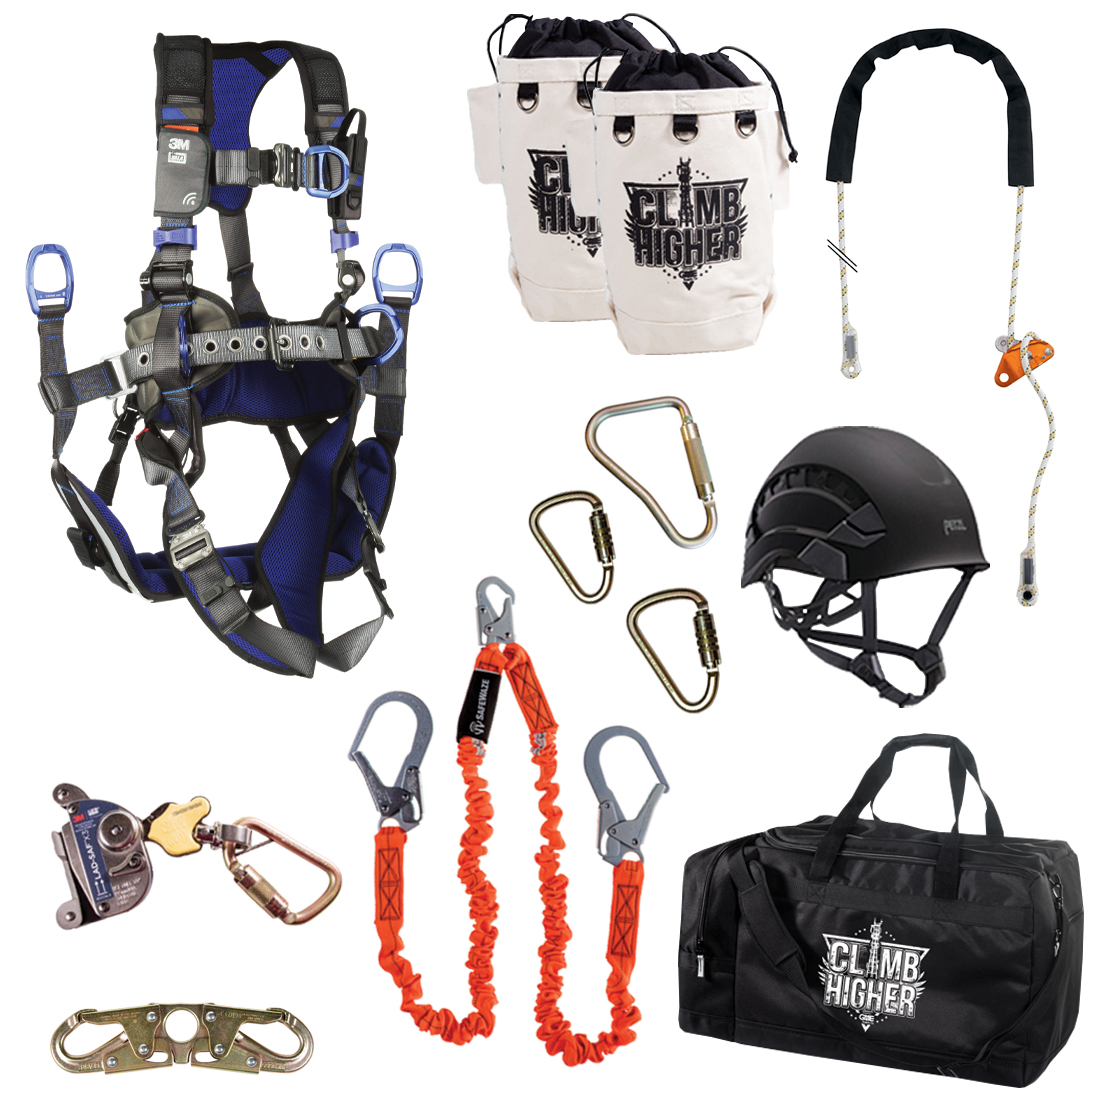 GME Supply 90005 ExoFit NEX Tower Climbing Harness Kit from GME Supply